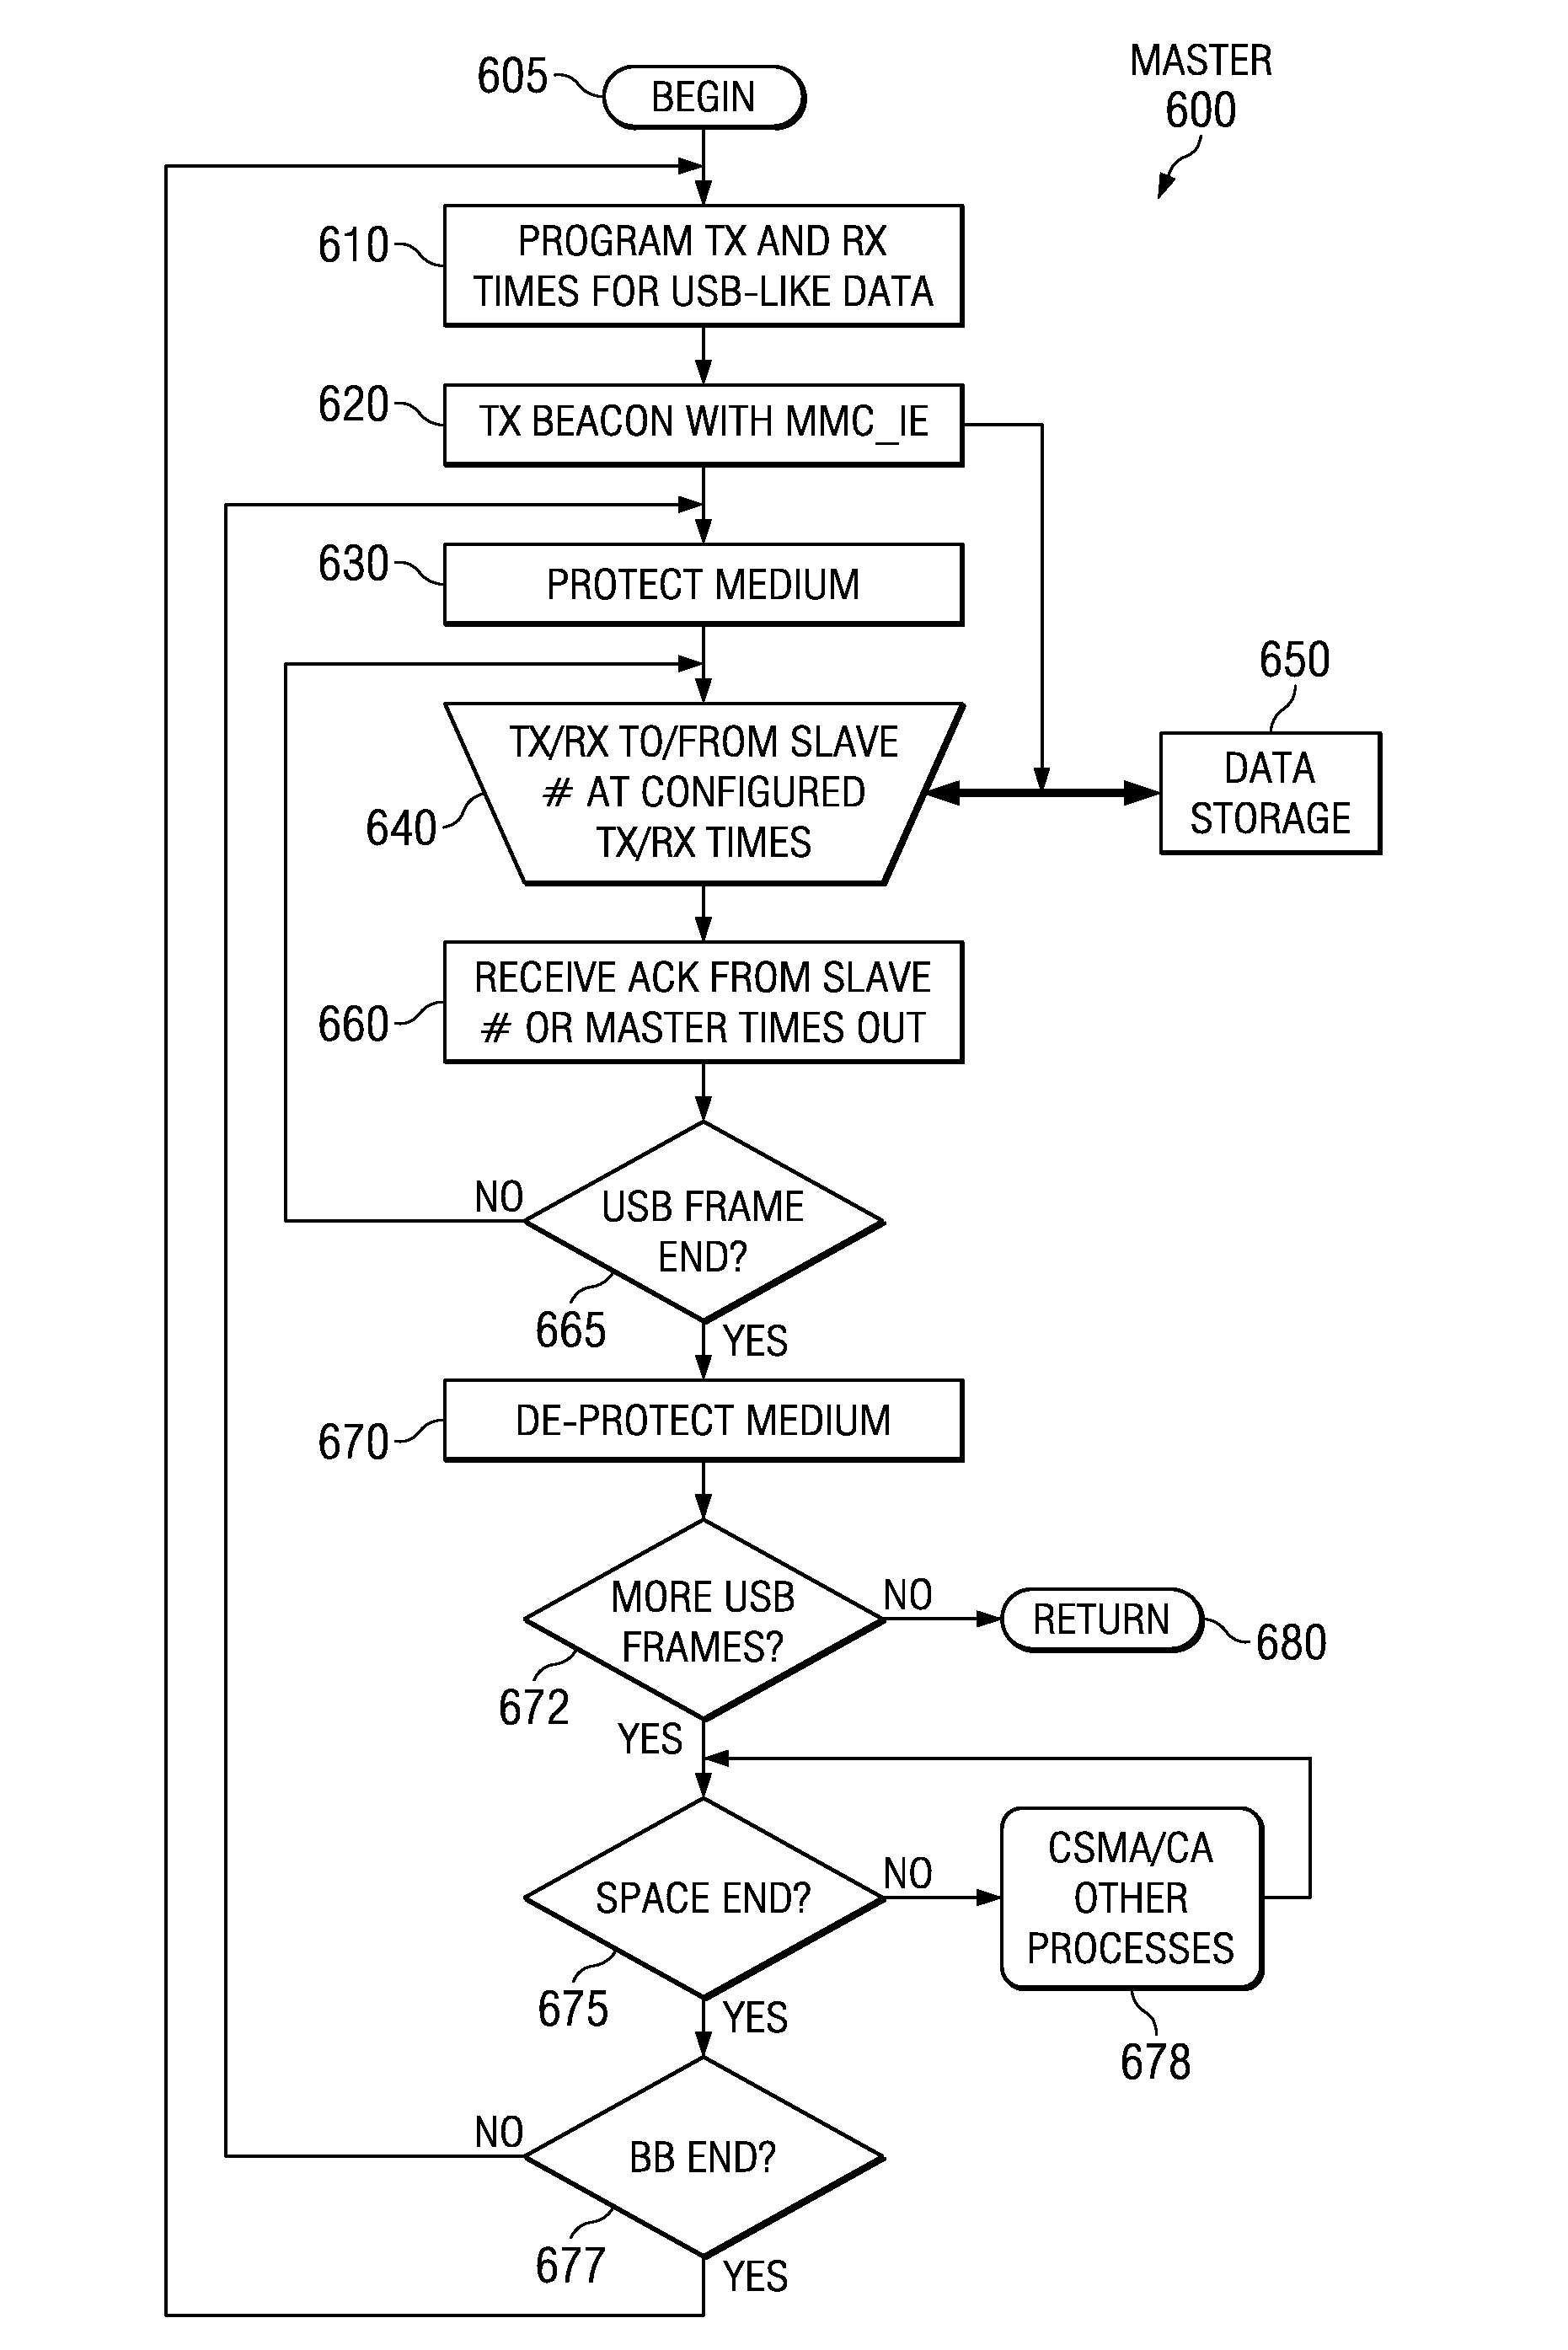 INTERRELATED WiFi AND USB PROTOCOLS AND OTHER APPLICATION FRAMEWORK PROCESSES, CIRCUITS AND SYSTEMS